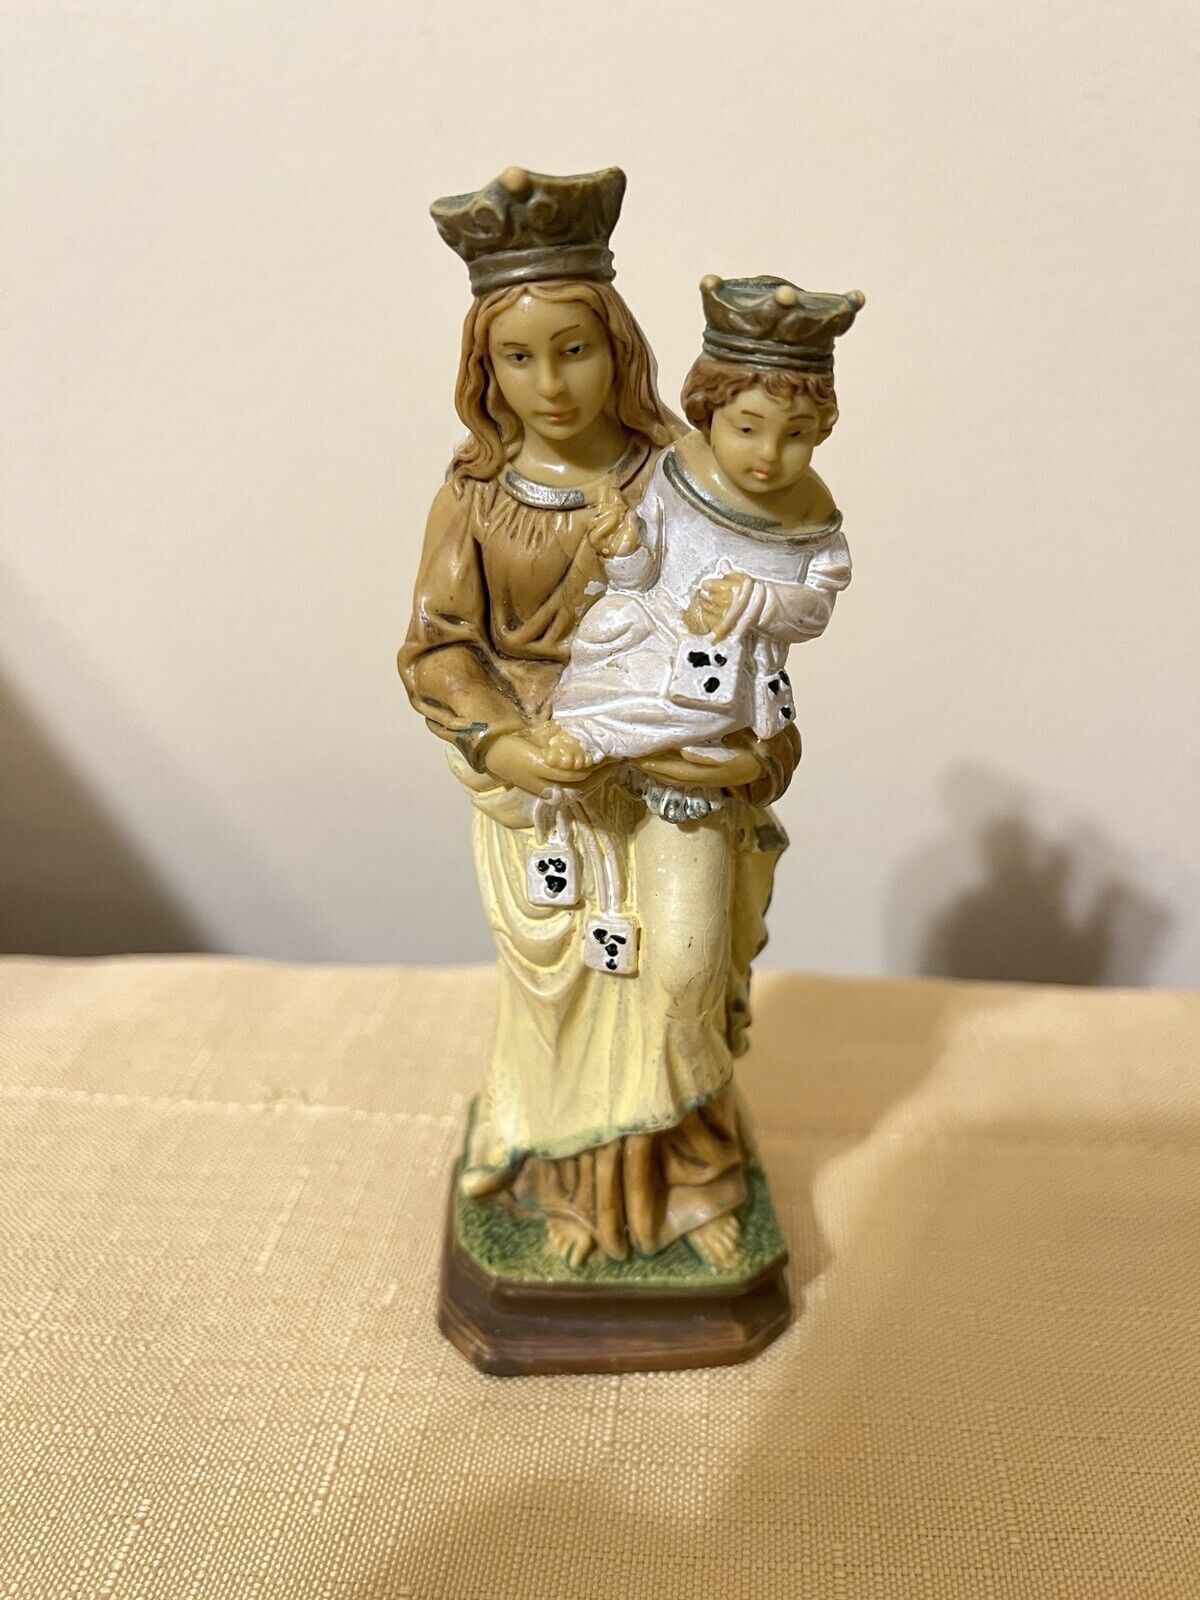 FONTANINI NATIVITY FIGURINE 5 in CROWNED OUR LADY OF MOUNT CARMEL S 145 Madonna